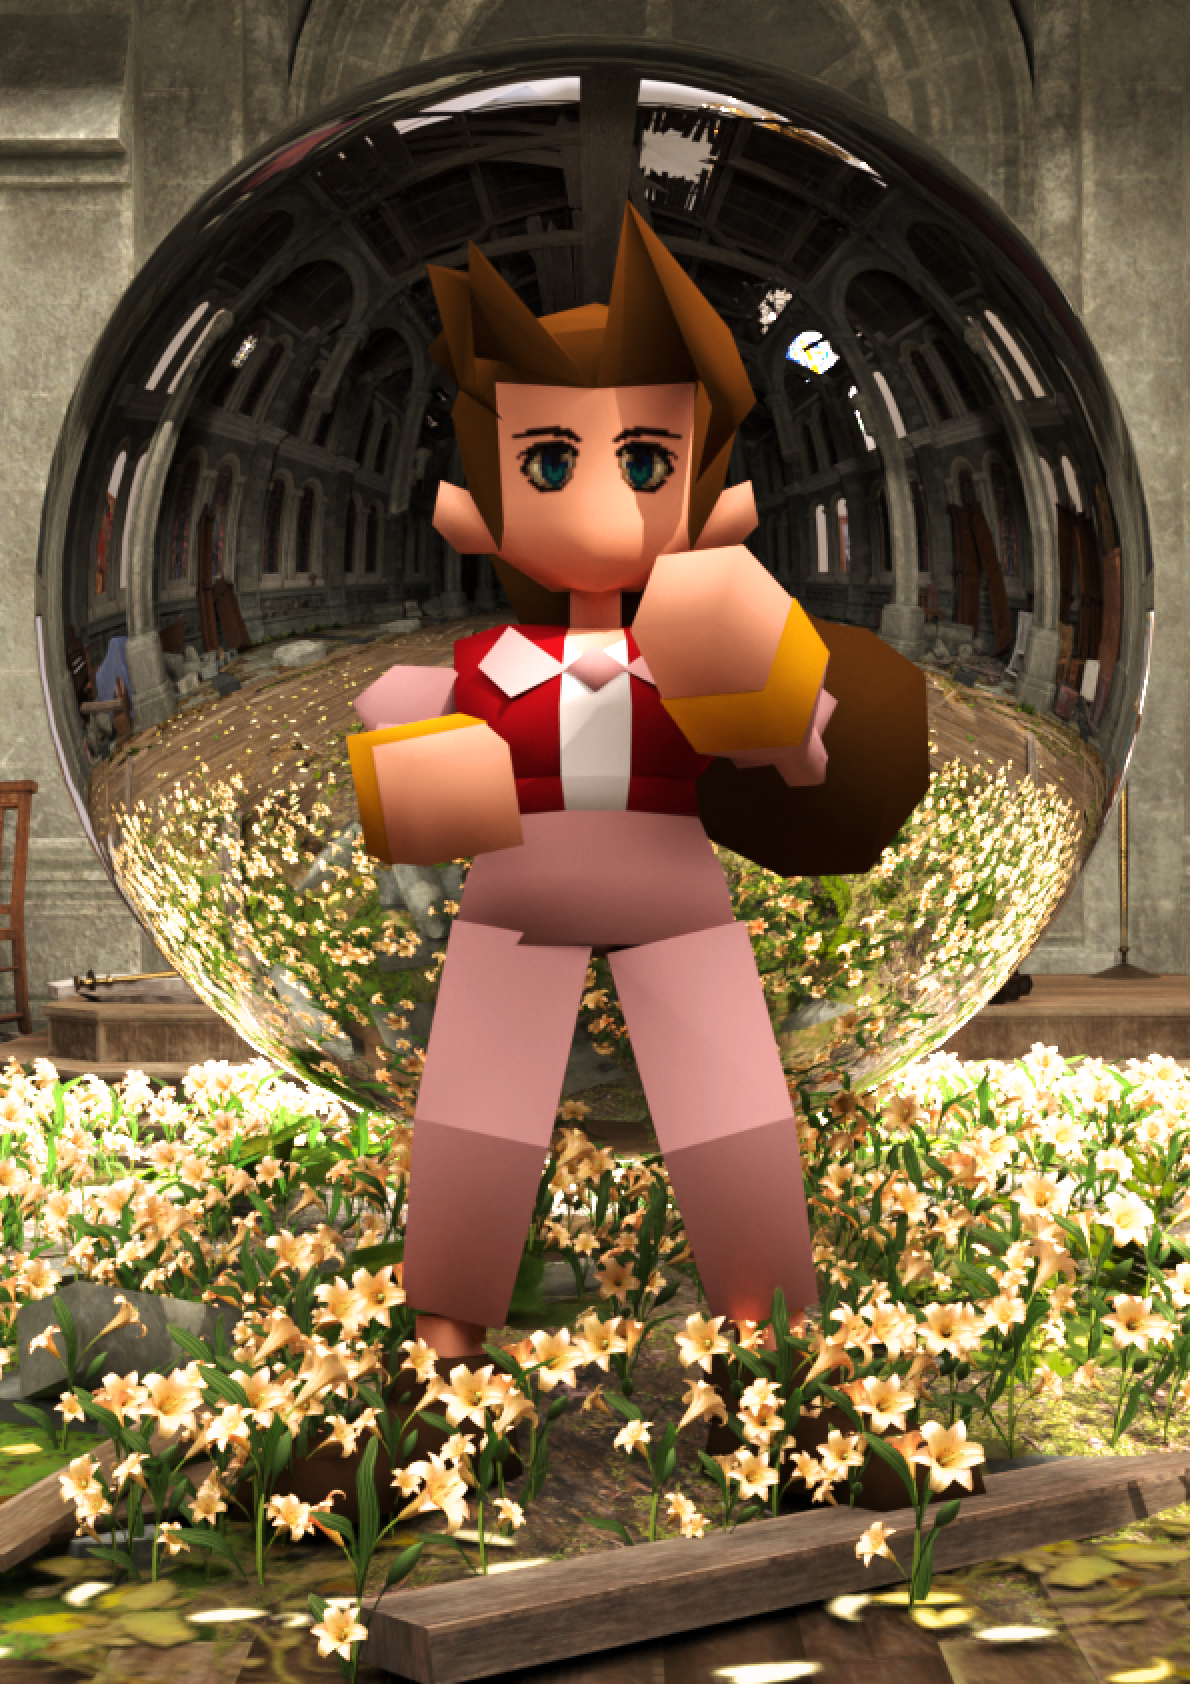 Aerith in her church. There is a reflective orb in the background.